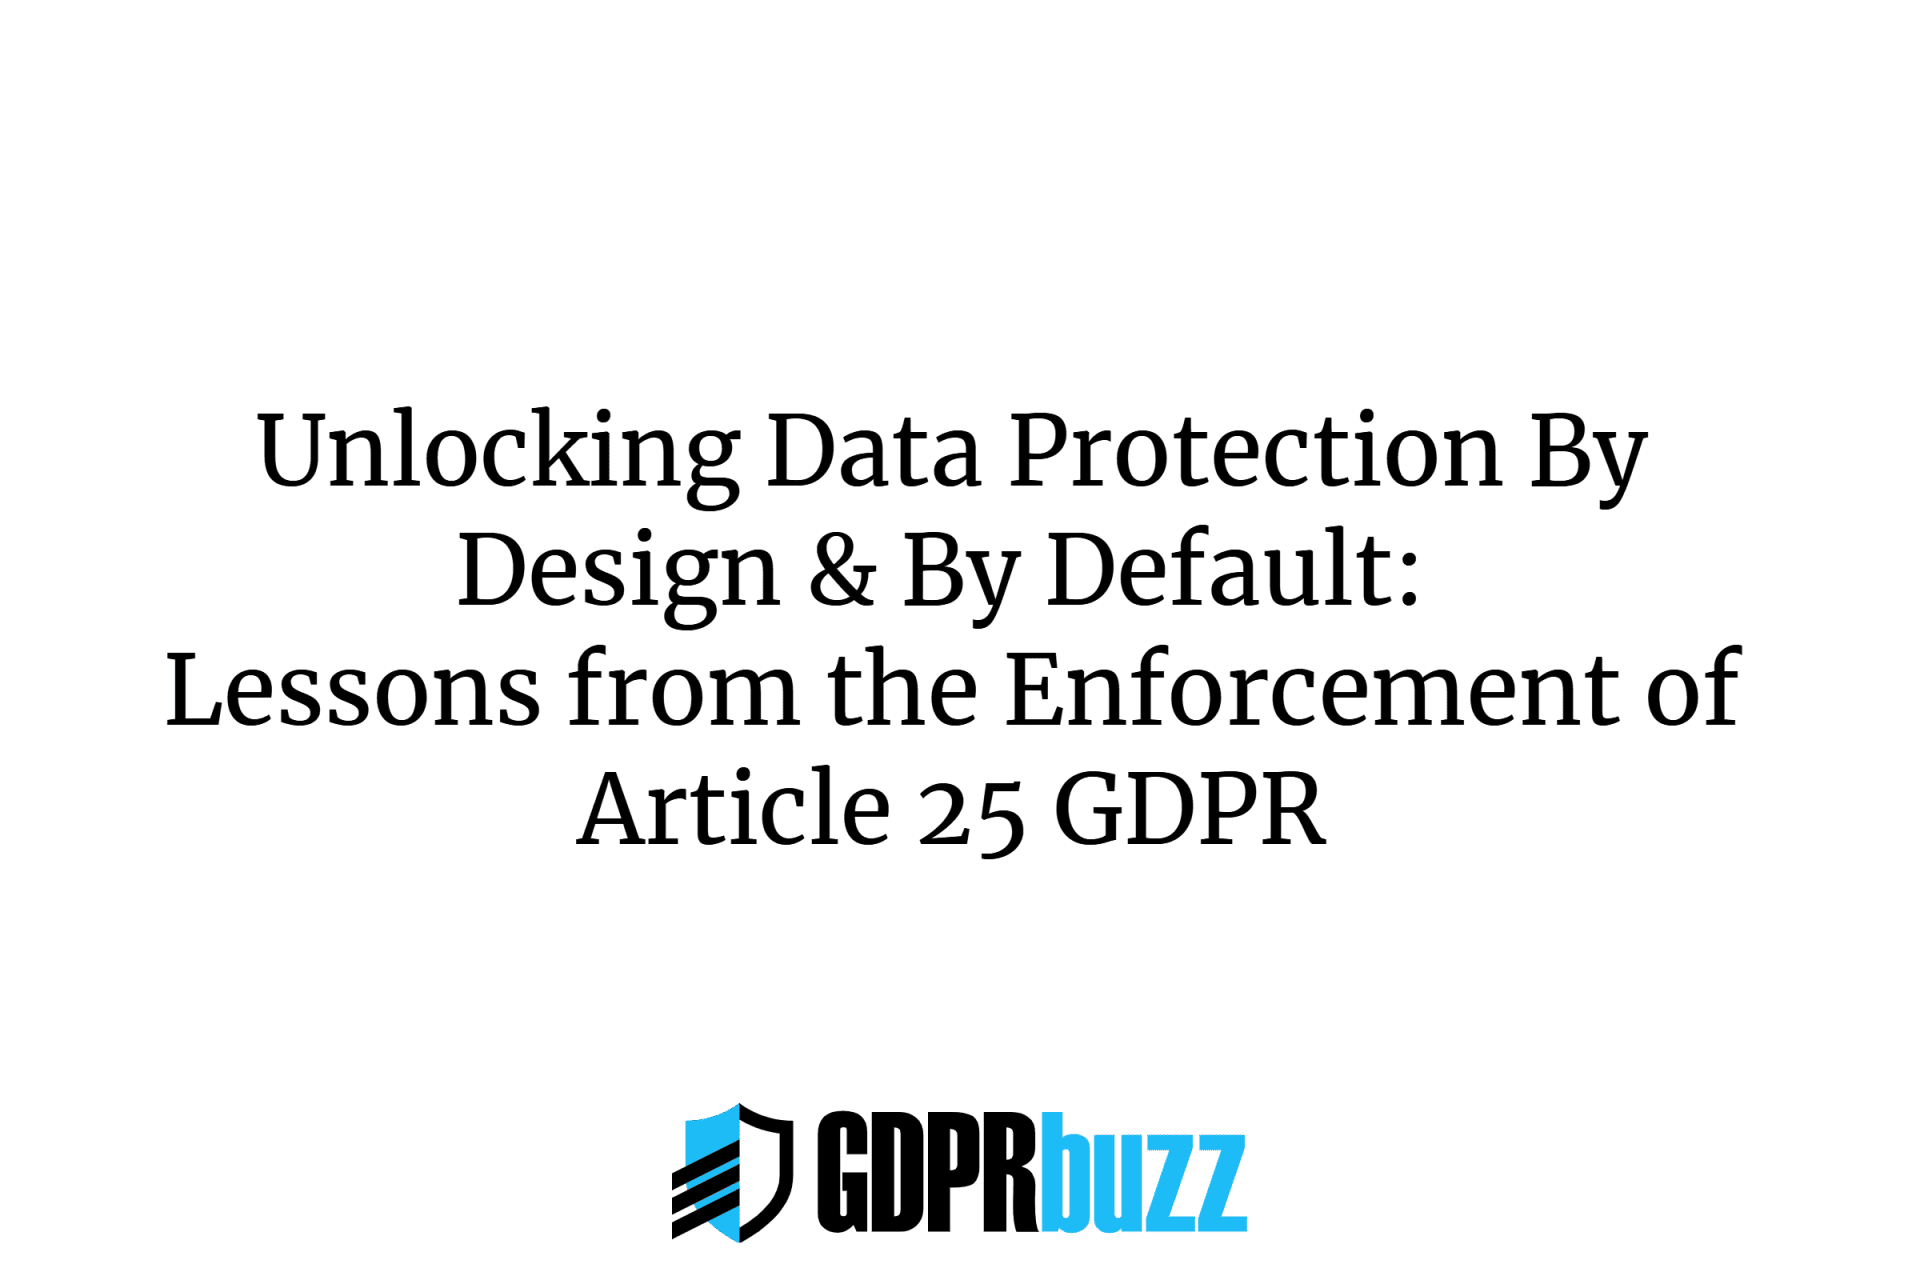 Unlocking data protection by design & by default: lessons from the enforcement of article 25 gdpr